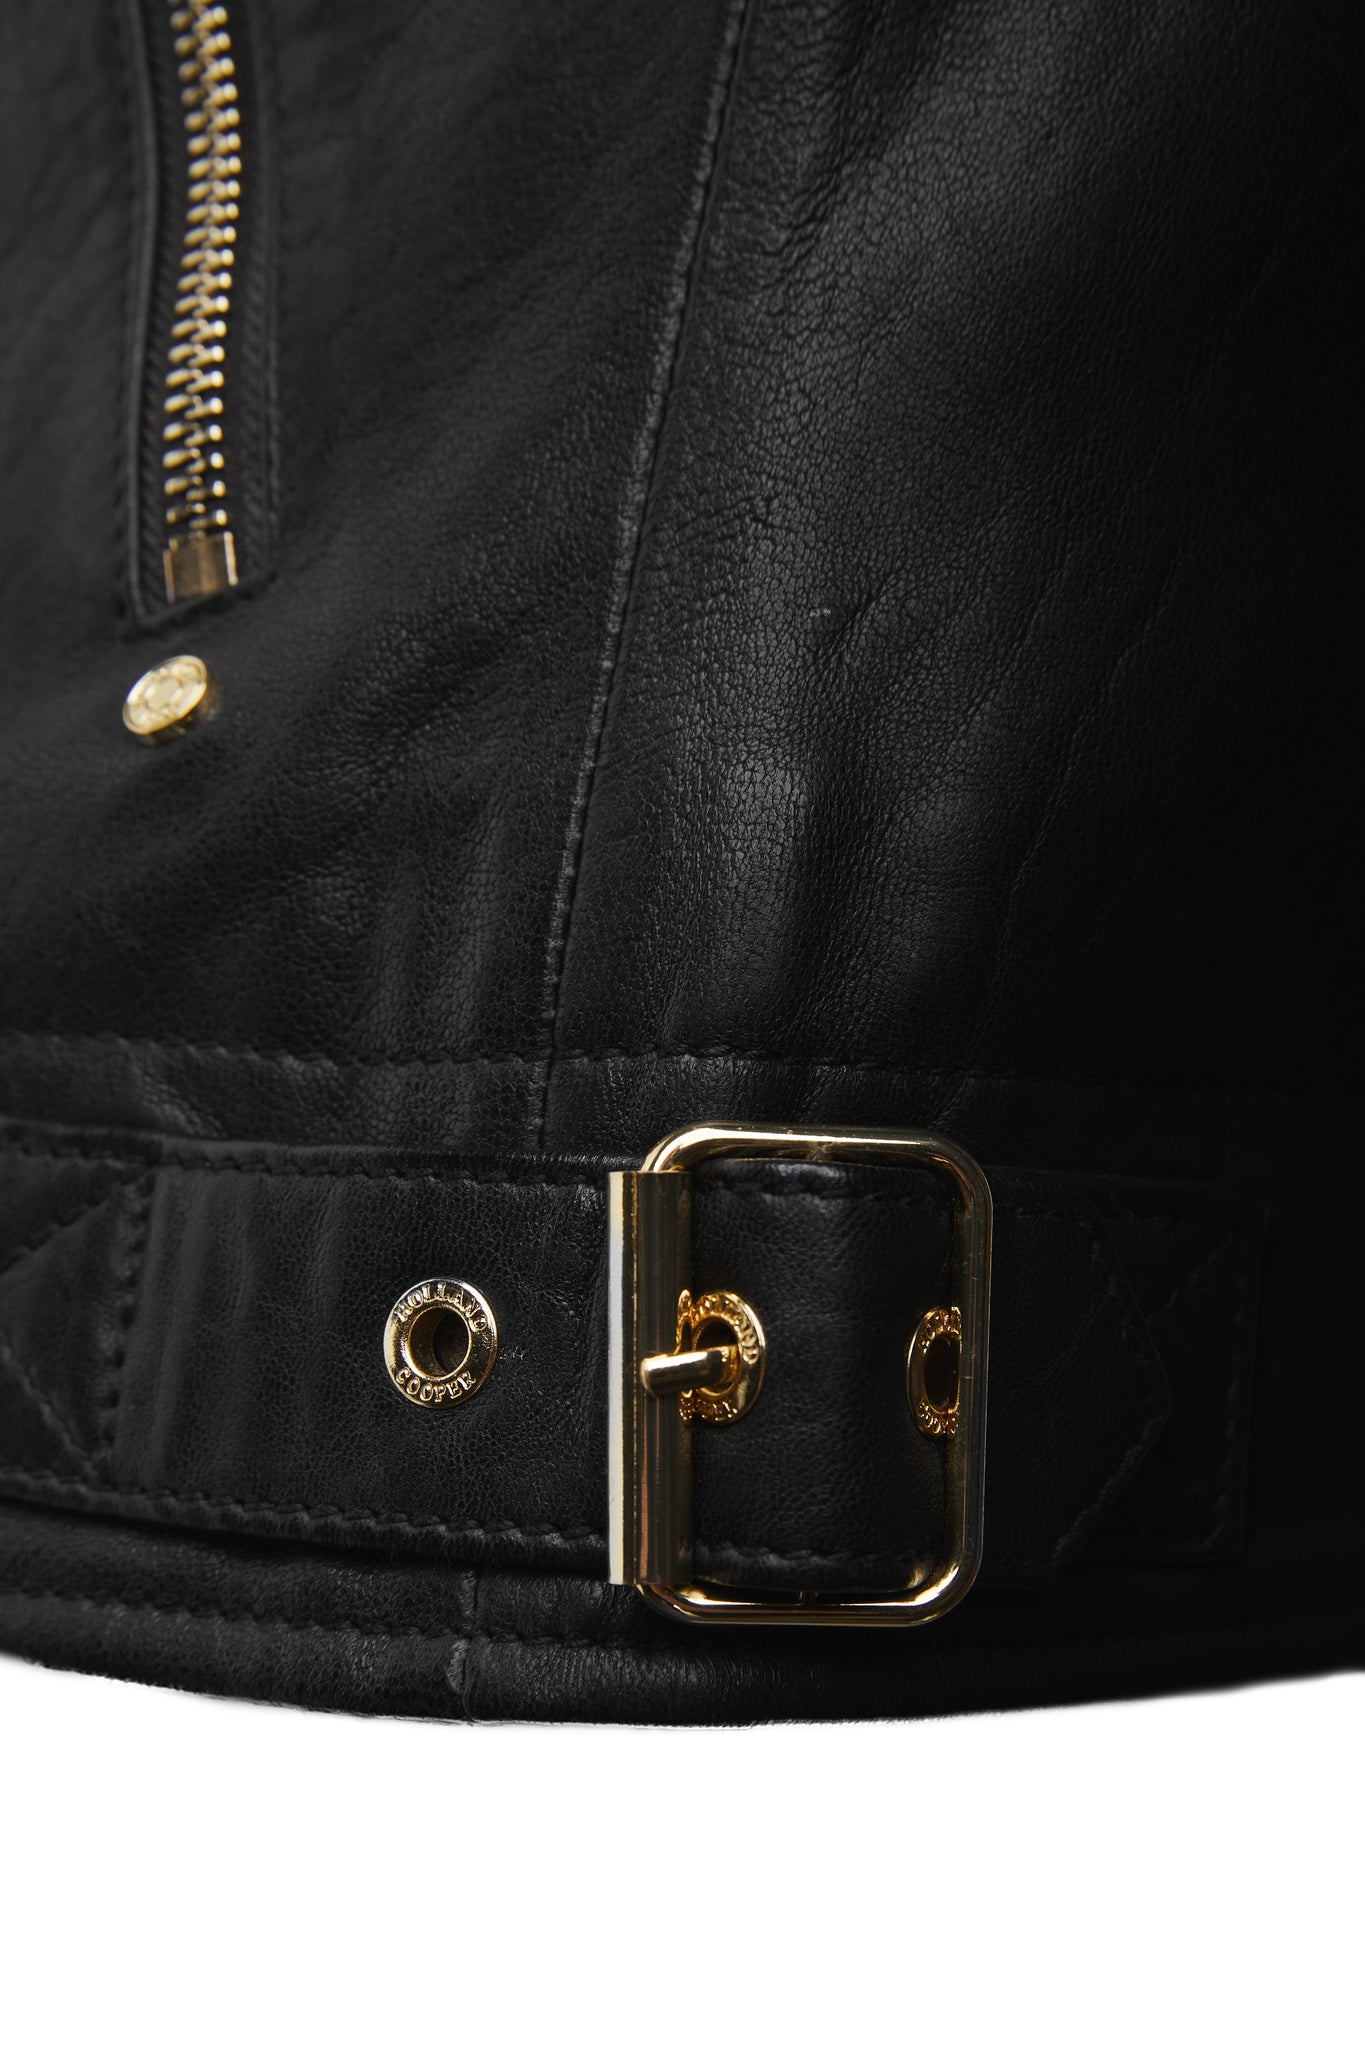 gold buckle detail at hem of womens leather biker jacket in black with fringing along the back and sleeves detailed with golf zips and small shield badge on arm